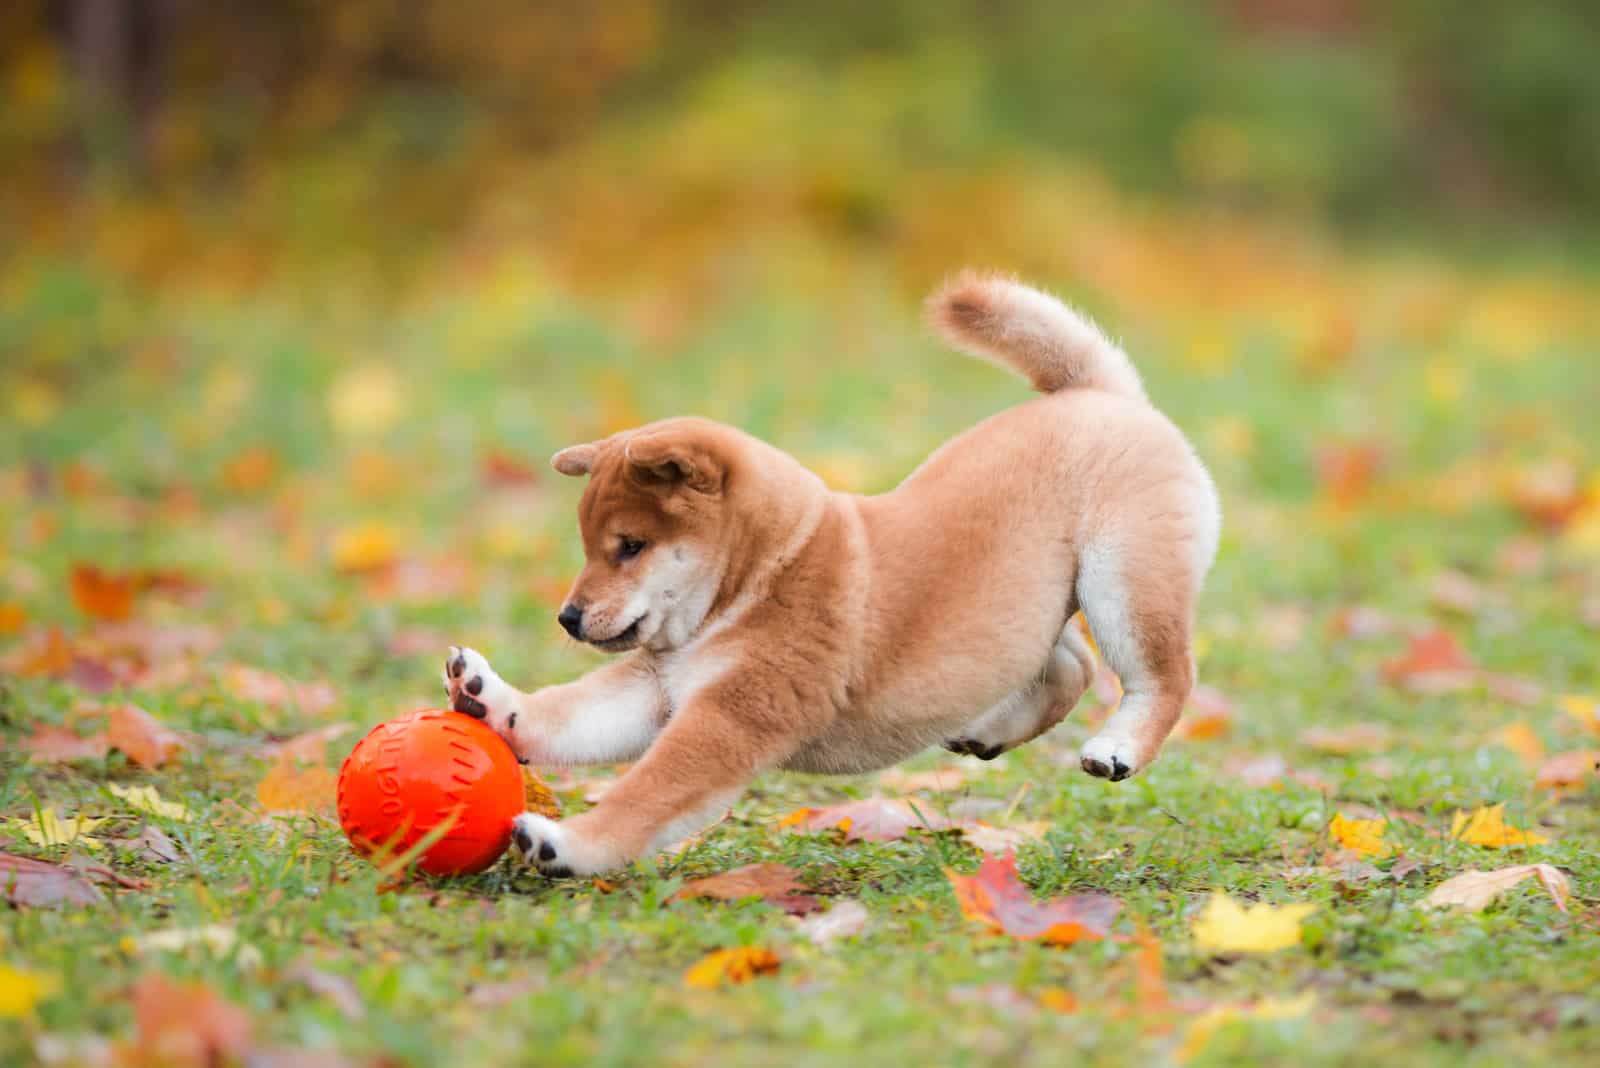 Shiba Inu plays with a ball in the garden